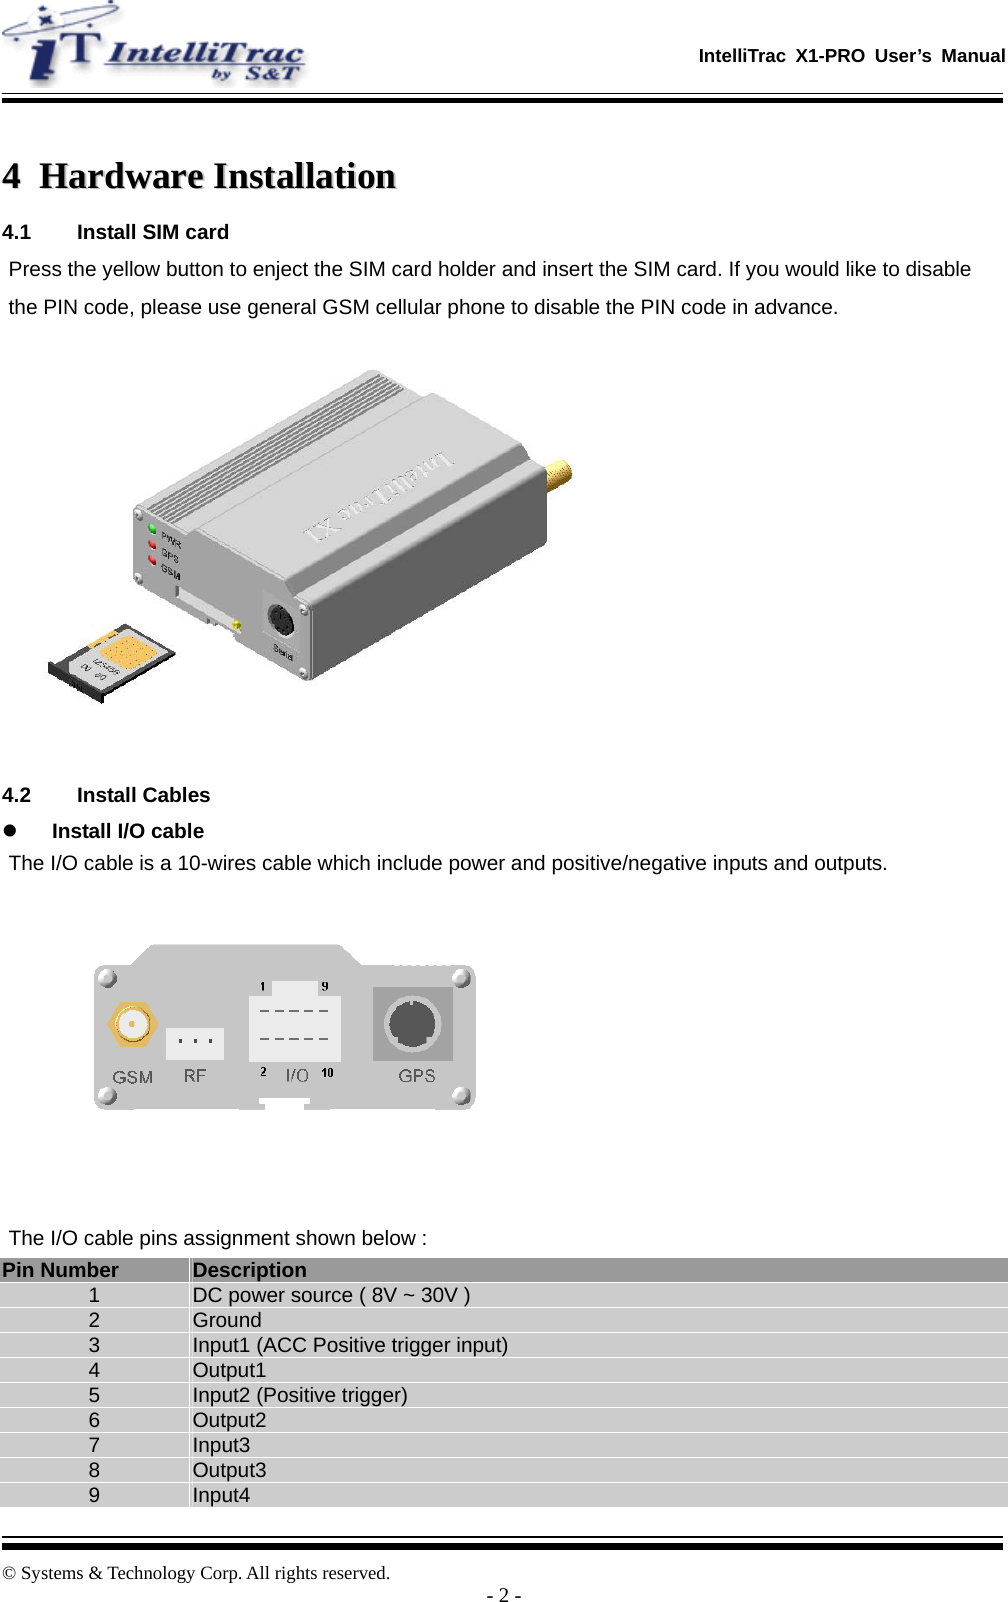  IntelliTrac X1-PRO User’s Manual   © Systems &amp; Technology Corp. All rights reserved.  - 2 -  44  HHaarrddwwaarree  IInnssttaallllaattiioonn  4.1  Install SIM card Press the yellow button to enject the SIM card holder and insert the SIM card. If you would like to disable the PIN code, please use general GSM cellular phone to disable the PIN code in advance.   4.2 Install Cables z Install I/O cable The I/O cable is a 10-wires cable which include power and positive/negative inputs and outputs.  The I/O cable pins assignment shown below : Pin Number  Description 1  DC power source ( 8V ~ 30V ) 2  Ground 3  Input1 (ACC Positive trigger input) 4  Output1 5  Input2 (Positive trigger) 6  Output2 7  Input3 8  Output3 9  Input4 